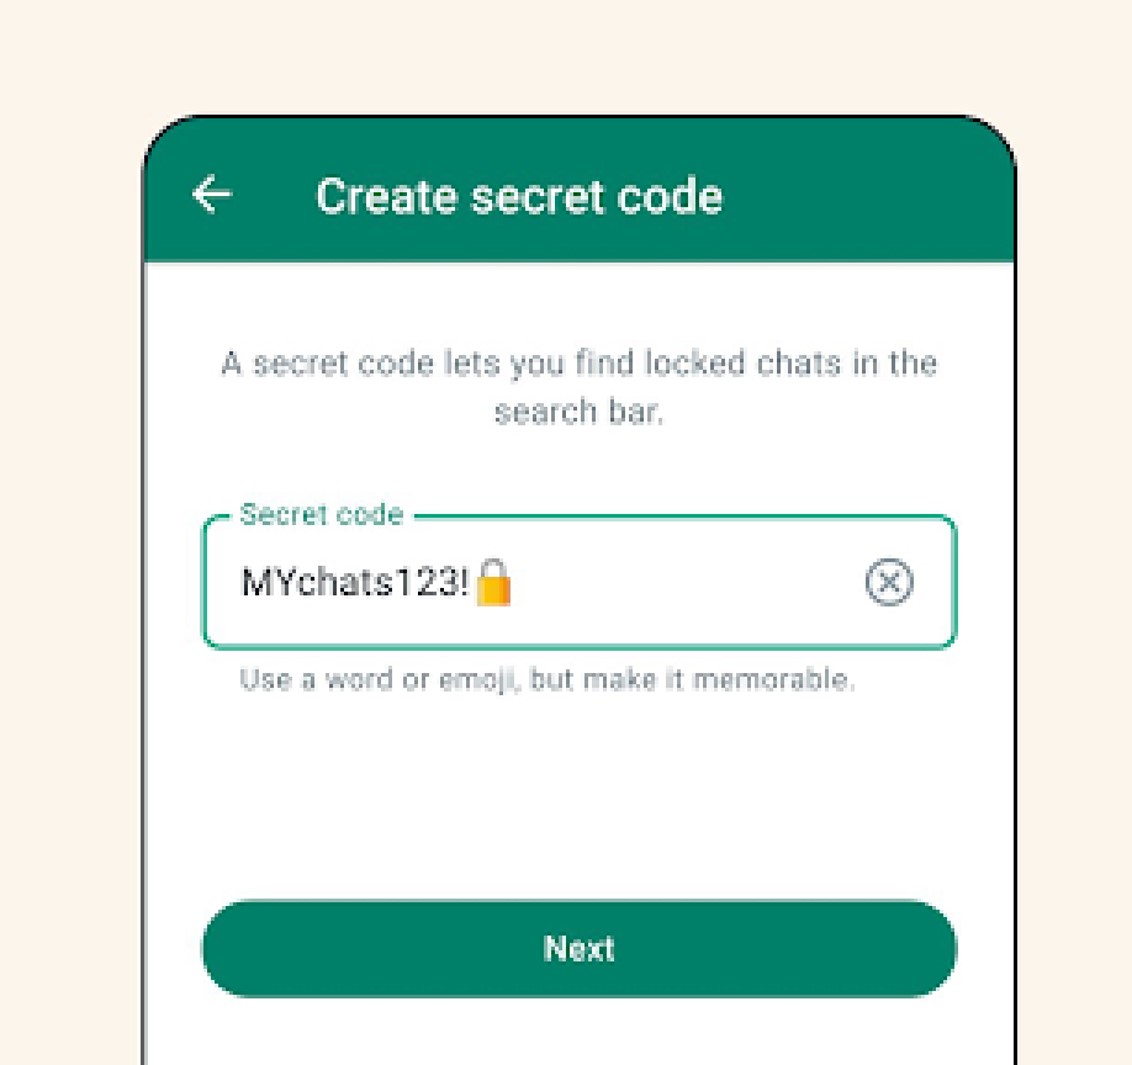 create a secret a strong secret code combining numbers, letters, emojis, and symbols